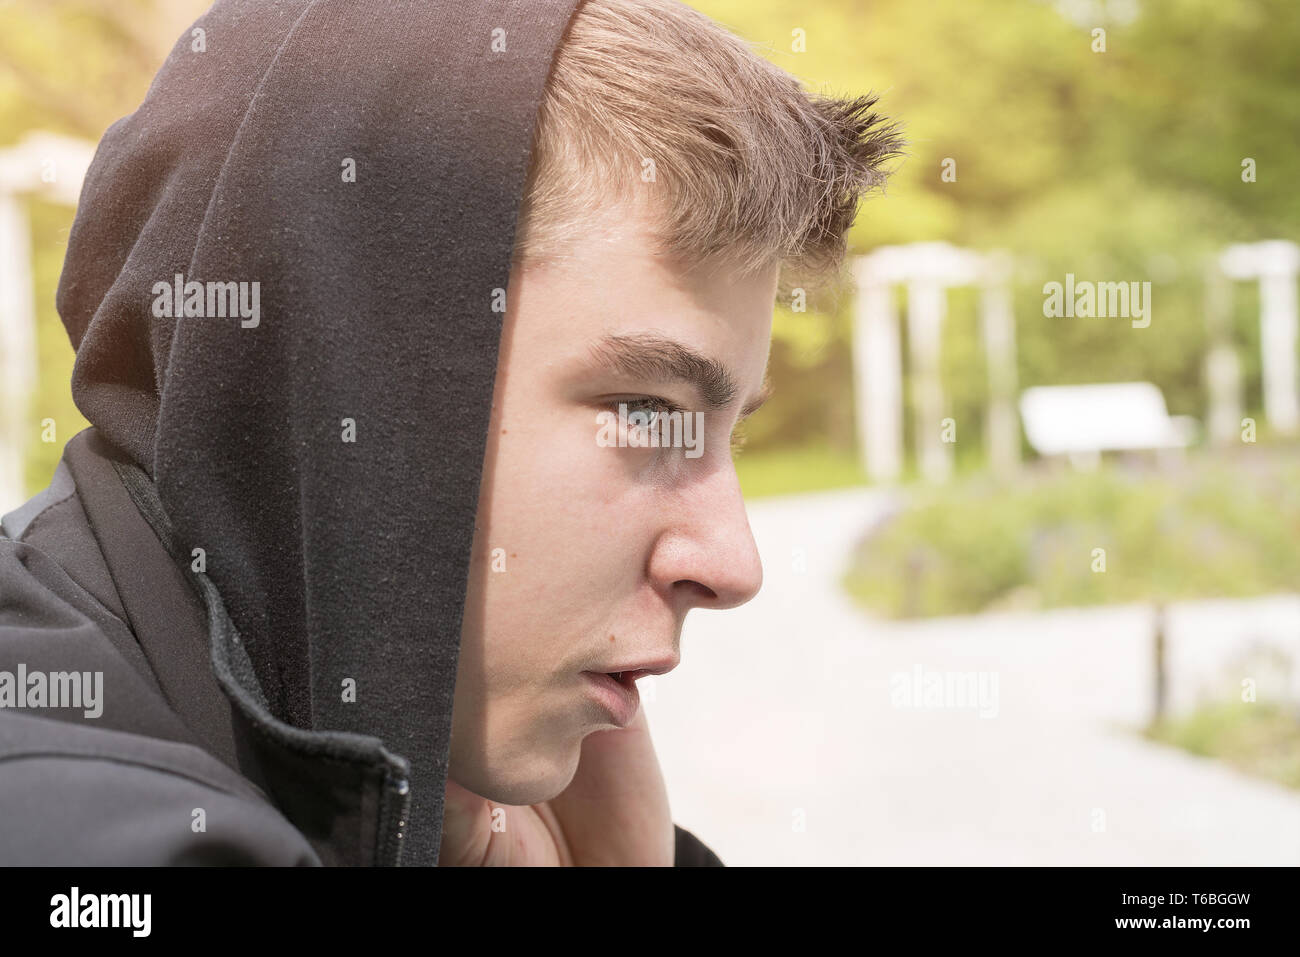 profile portrait of a young man with black hoodie Stock Photo